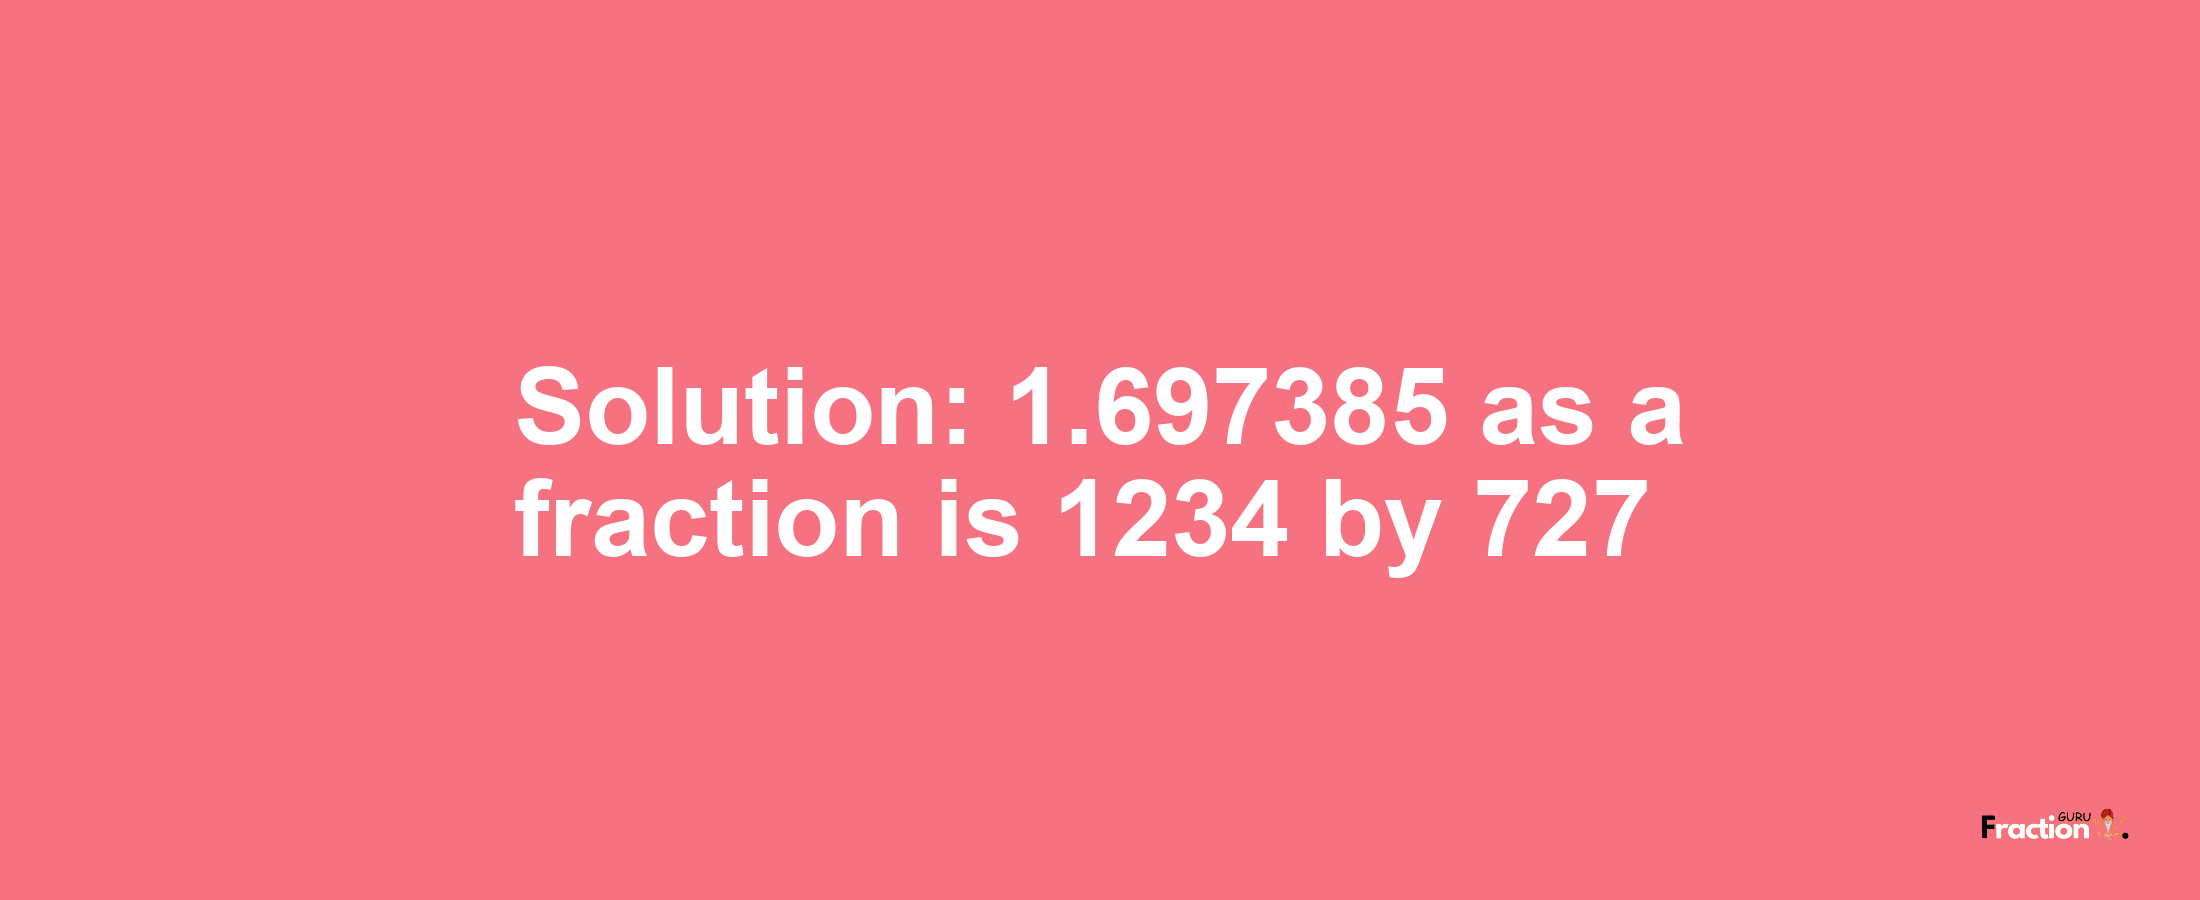 Solution:1.697385 as a fraction is 1234/727